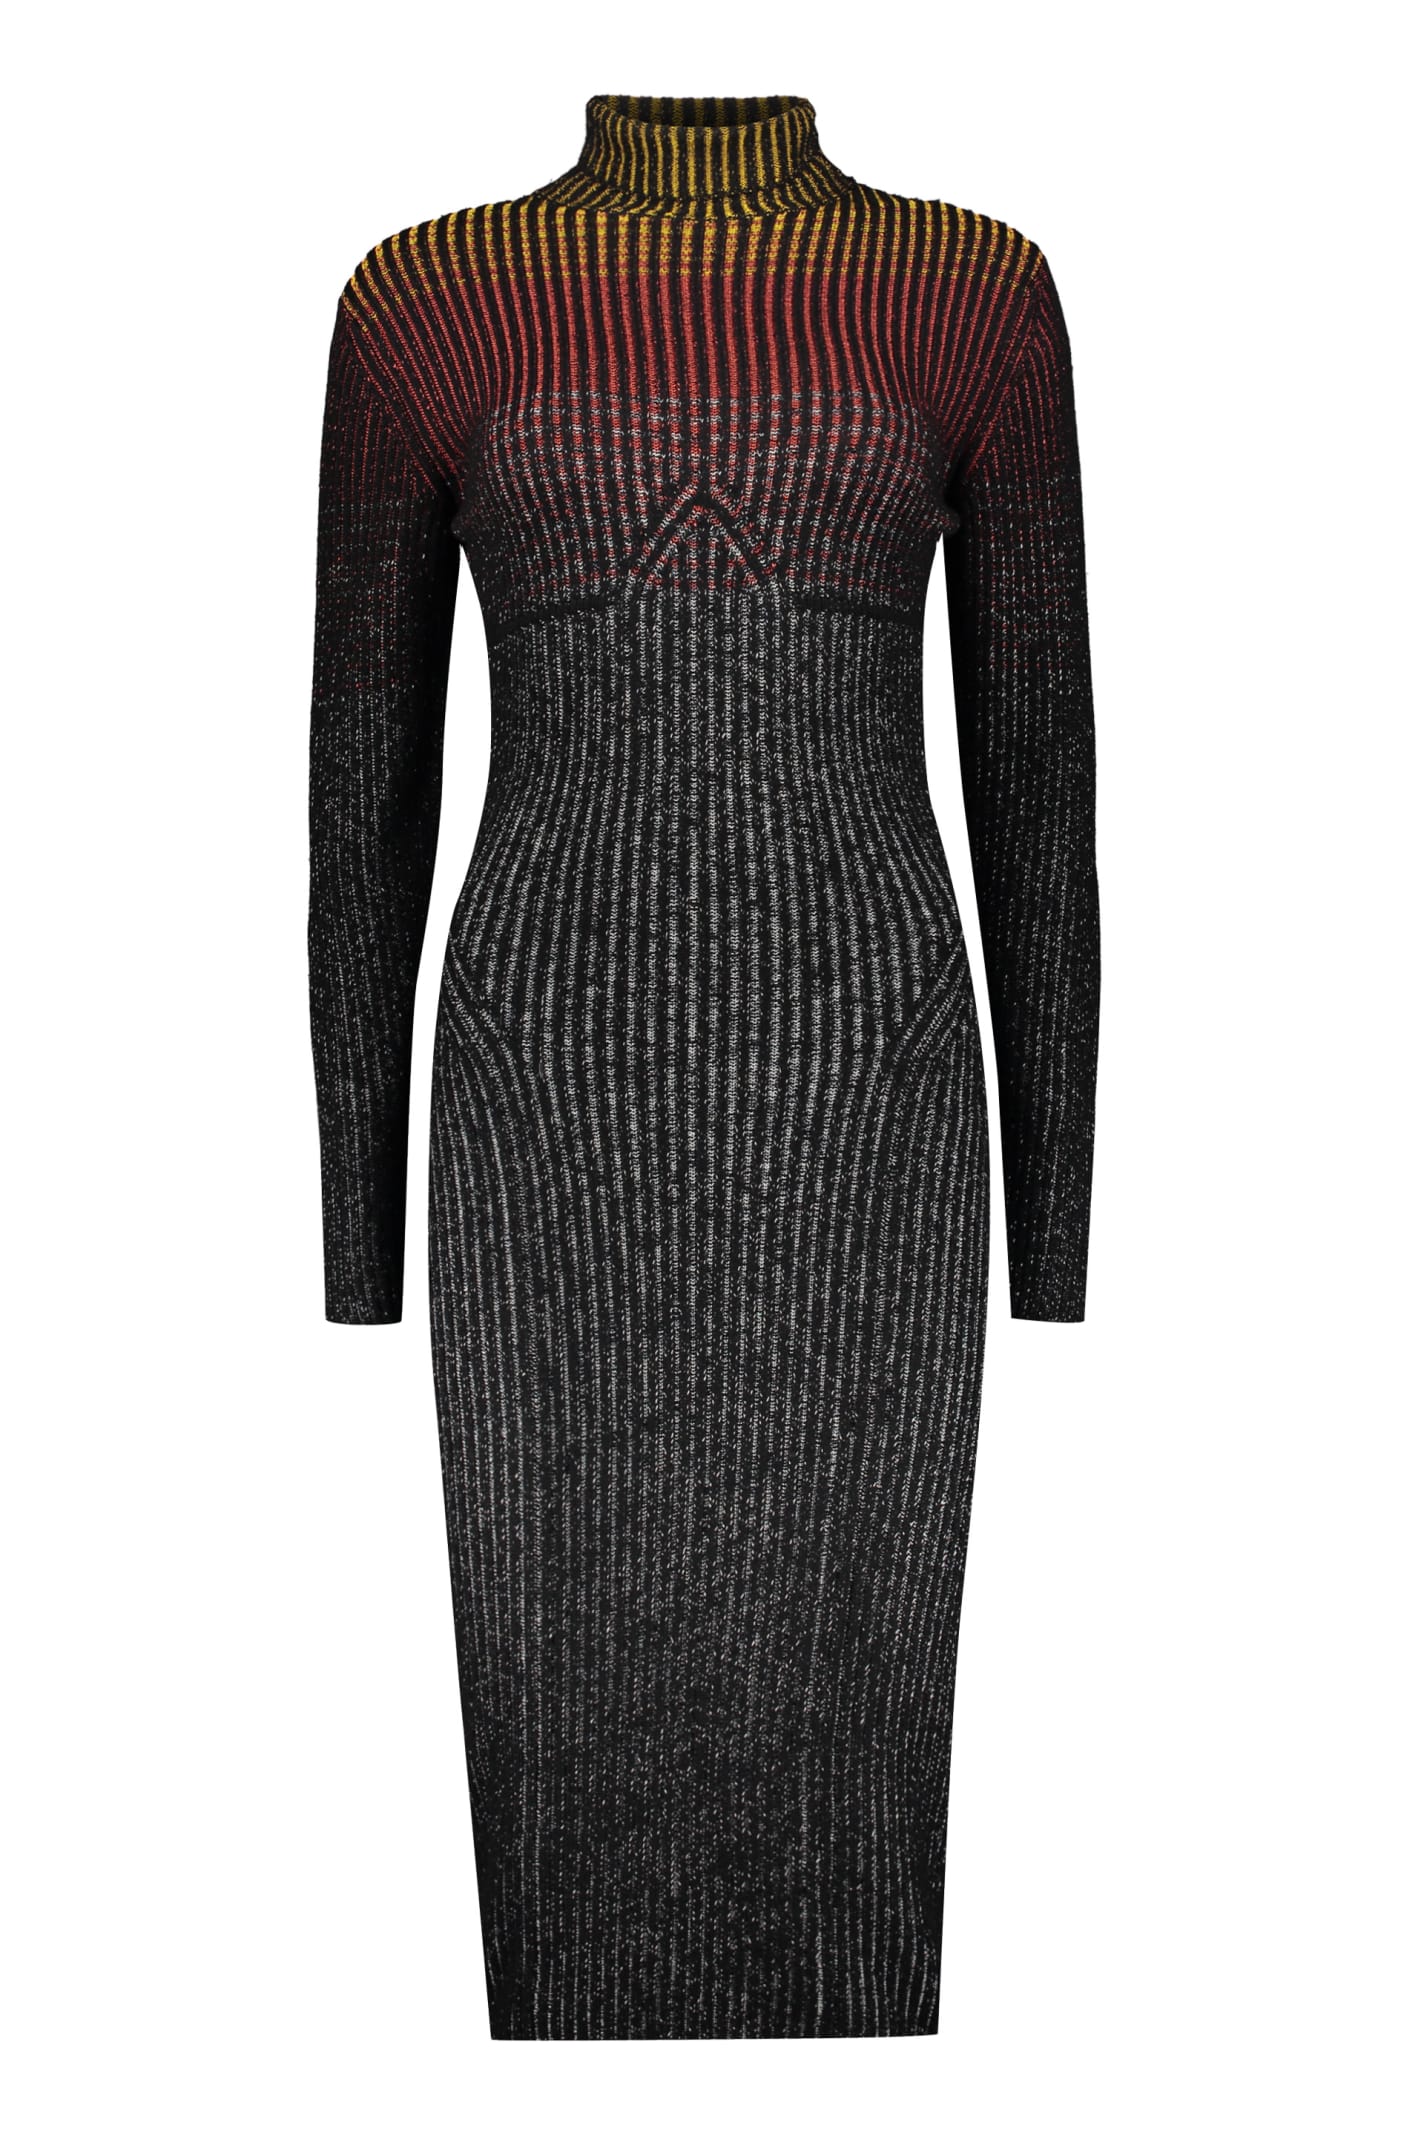 Missoni Ribbed Knit Dress In Multicolor